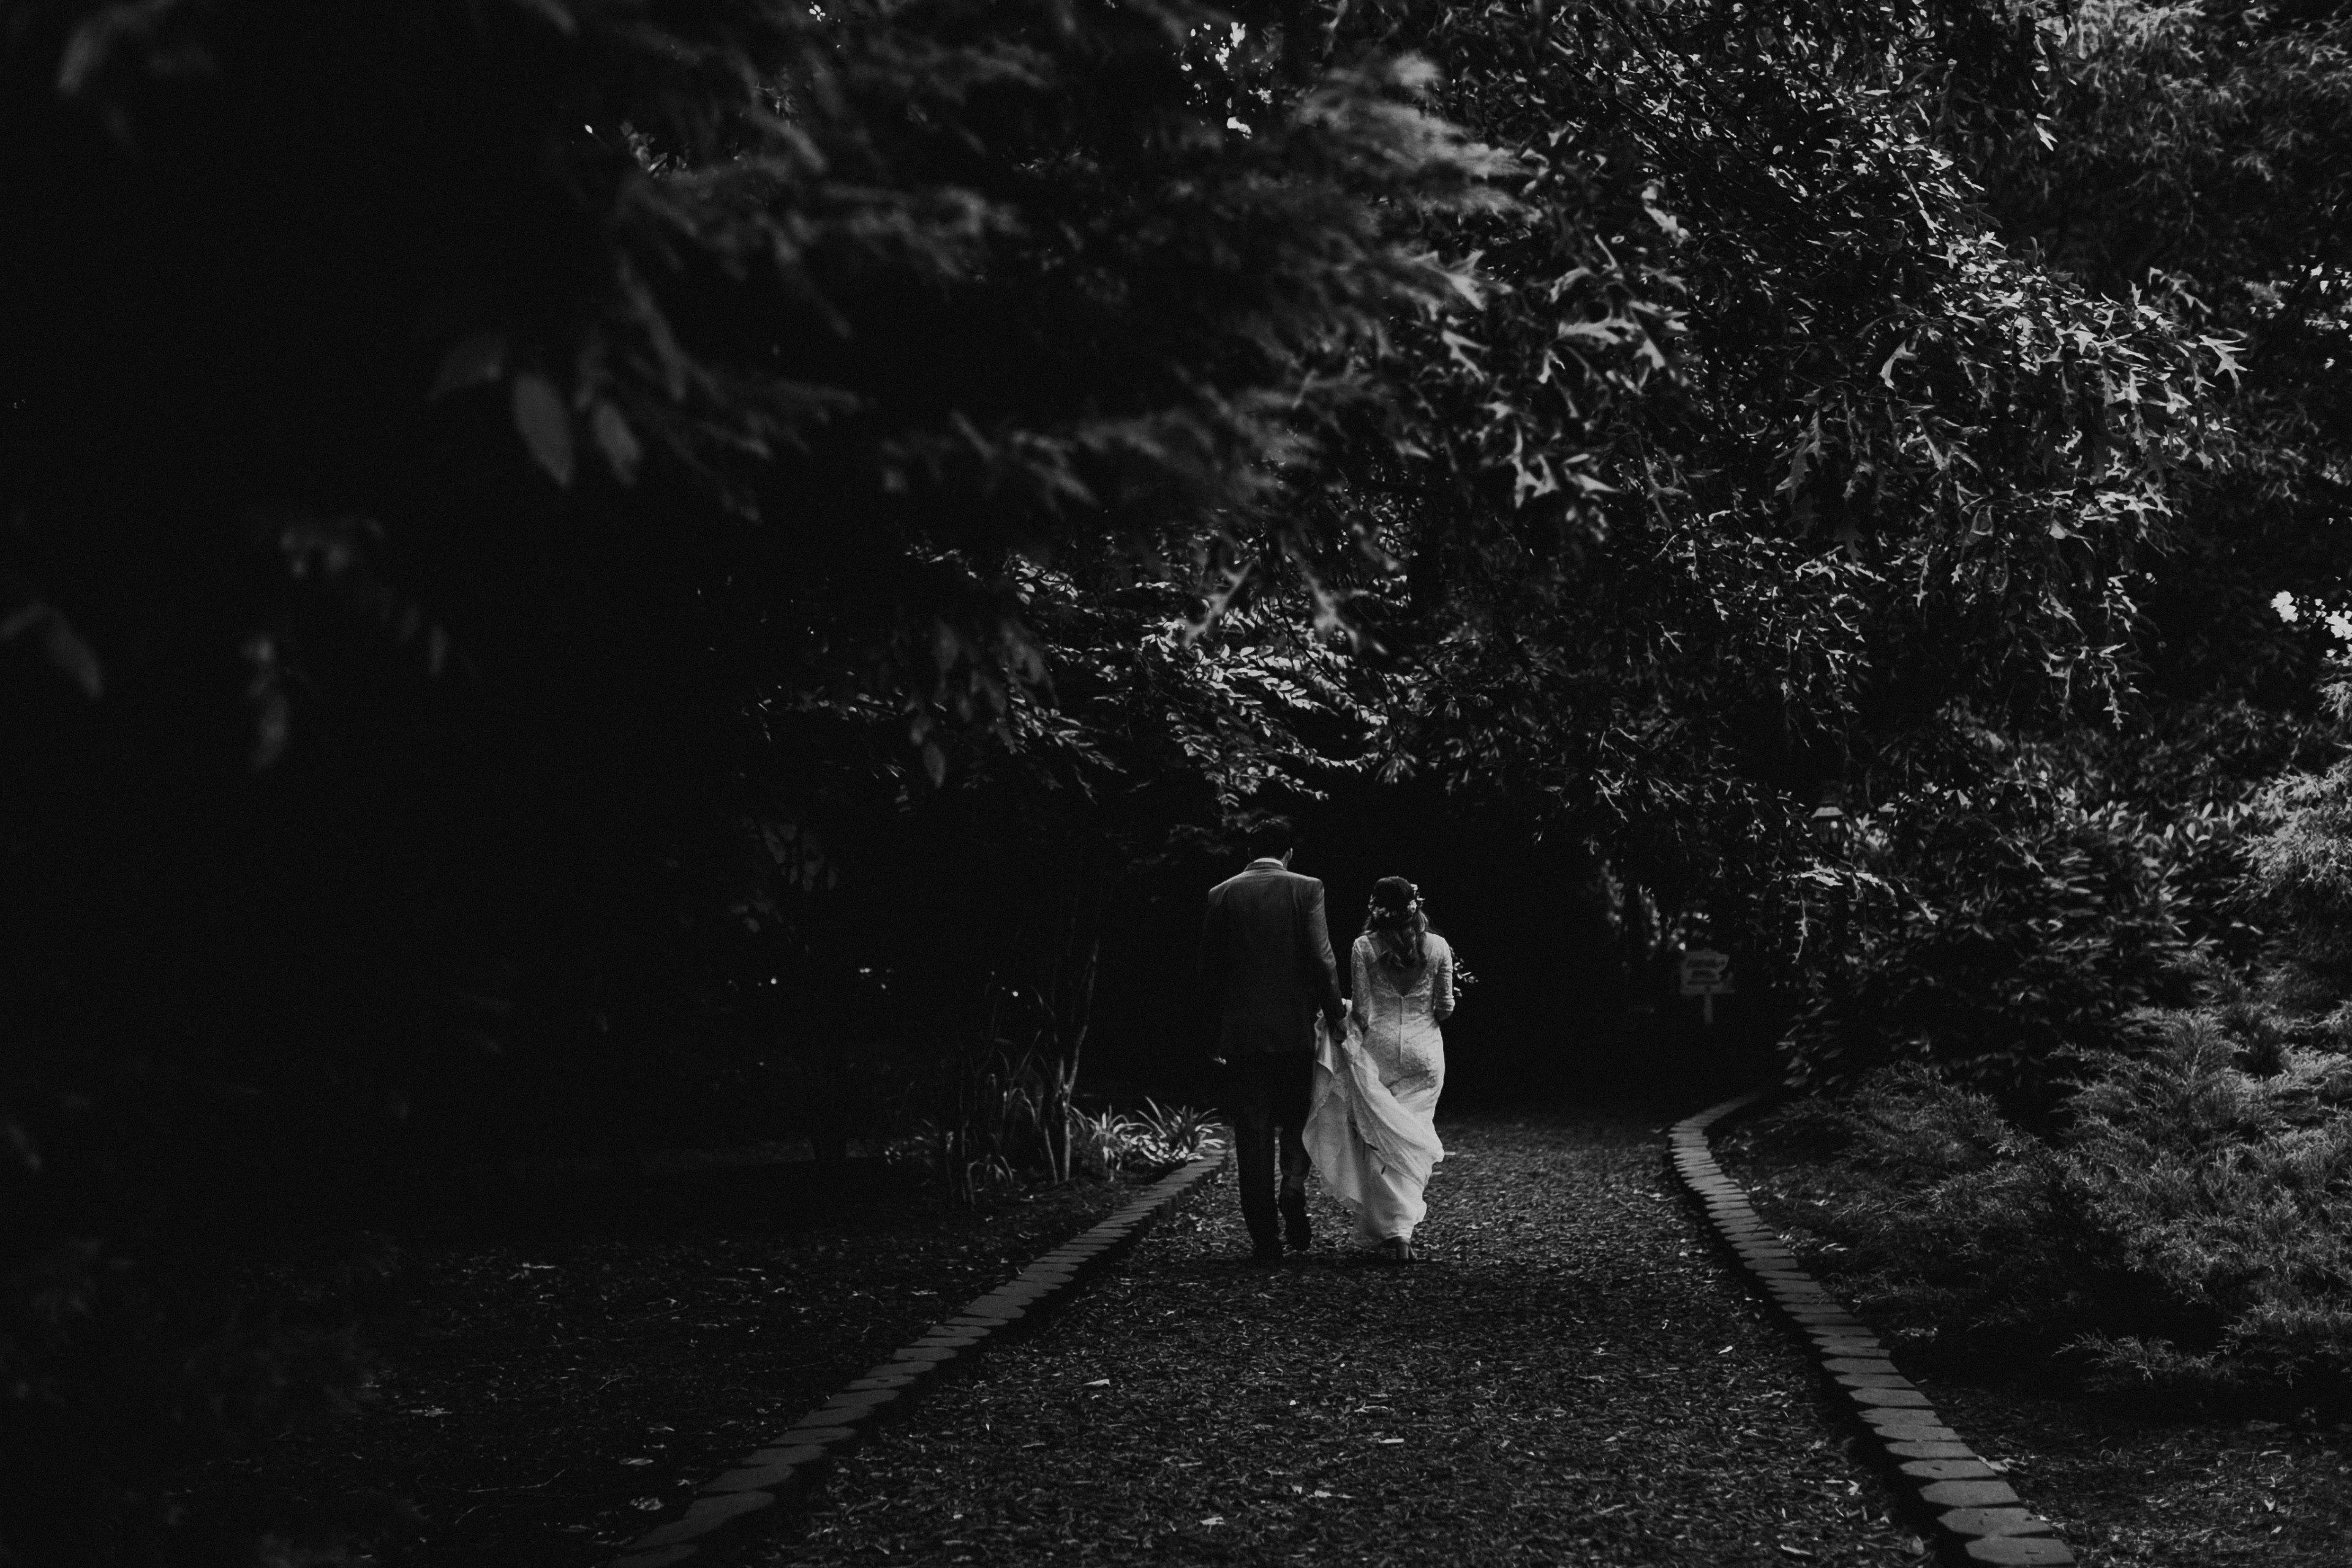 Wallpaper / a married couple walking down a forest path, _into the unknown 4k wallpaper